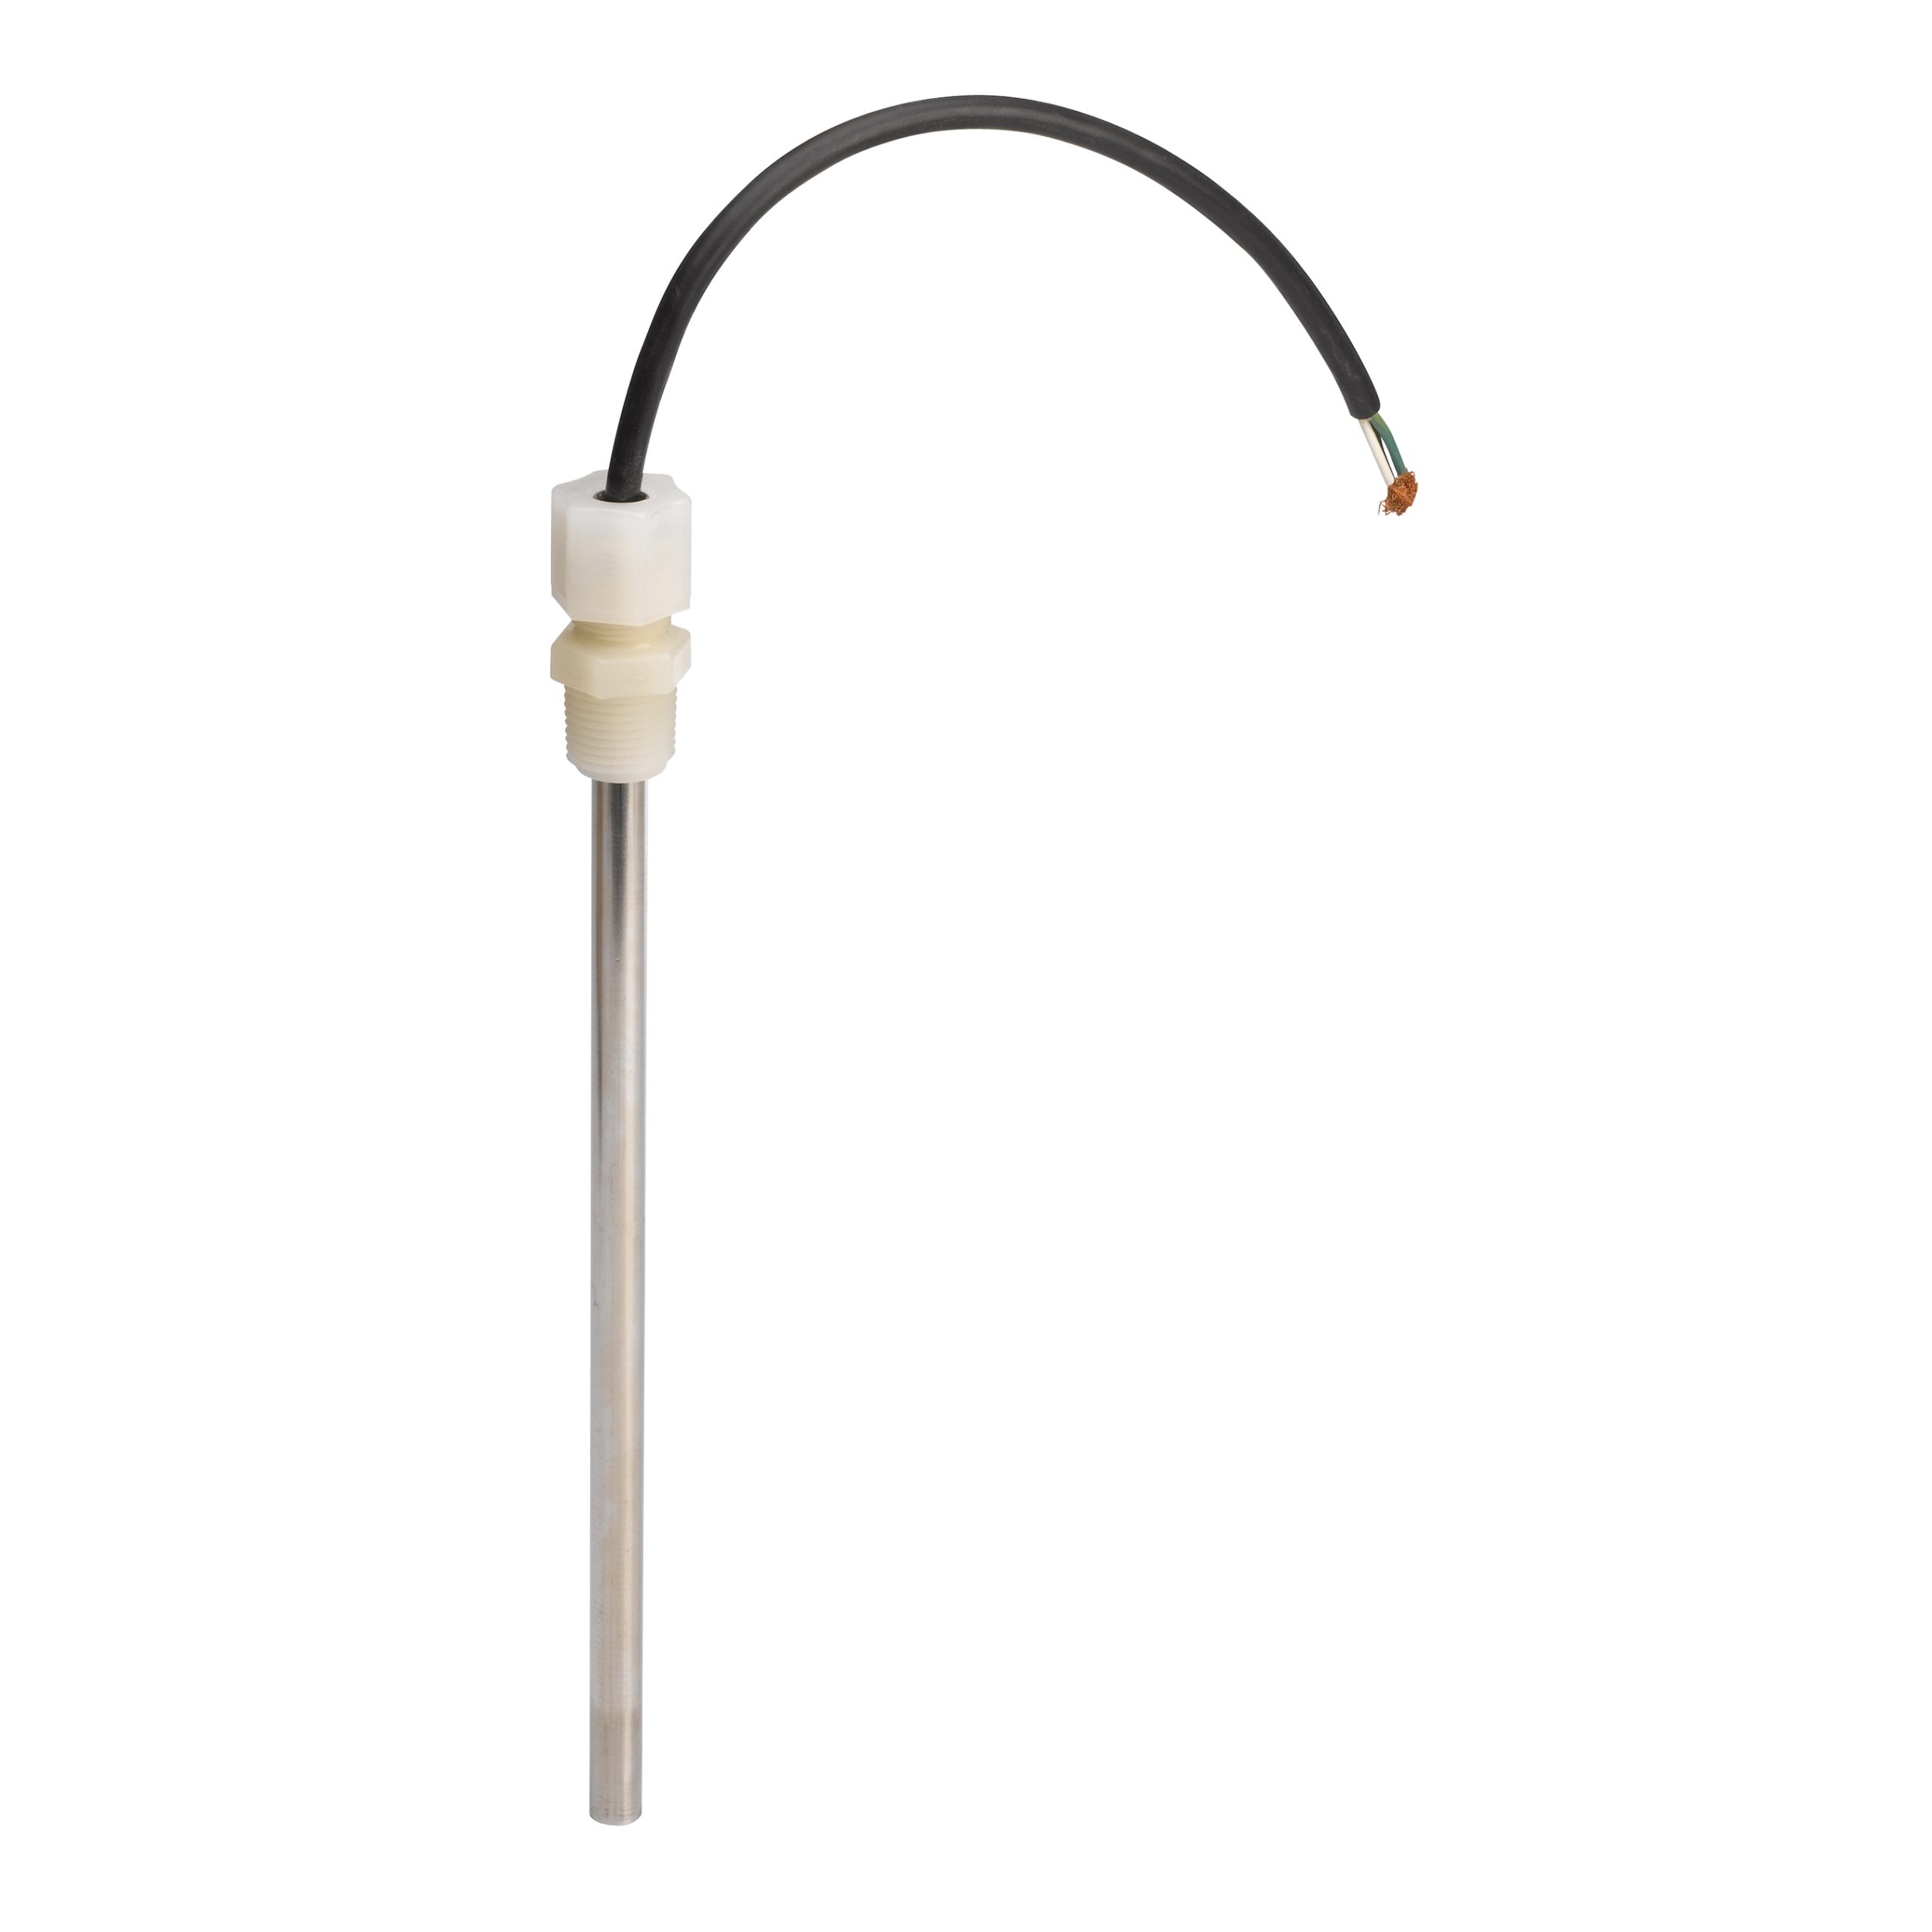 V Series Varipower – Small Electric Immersion Heater